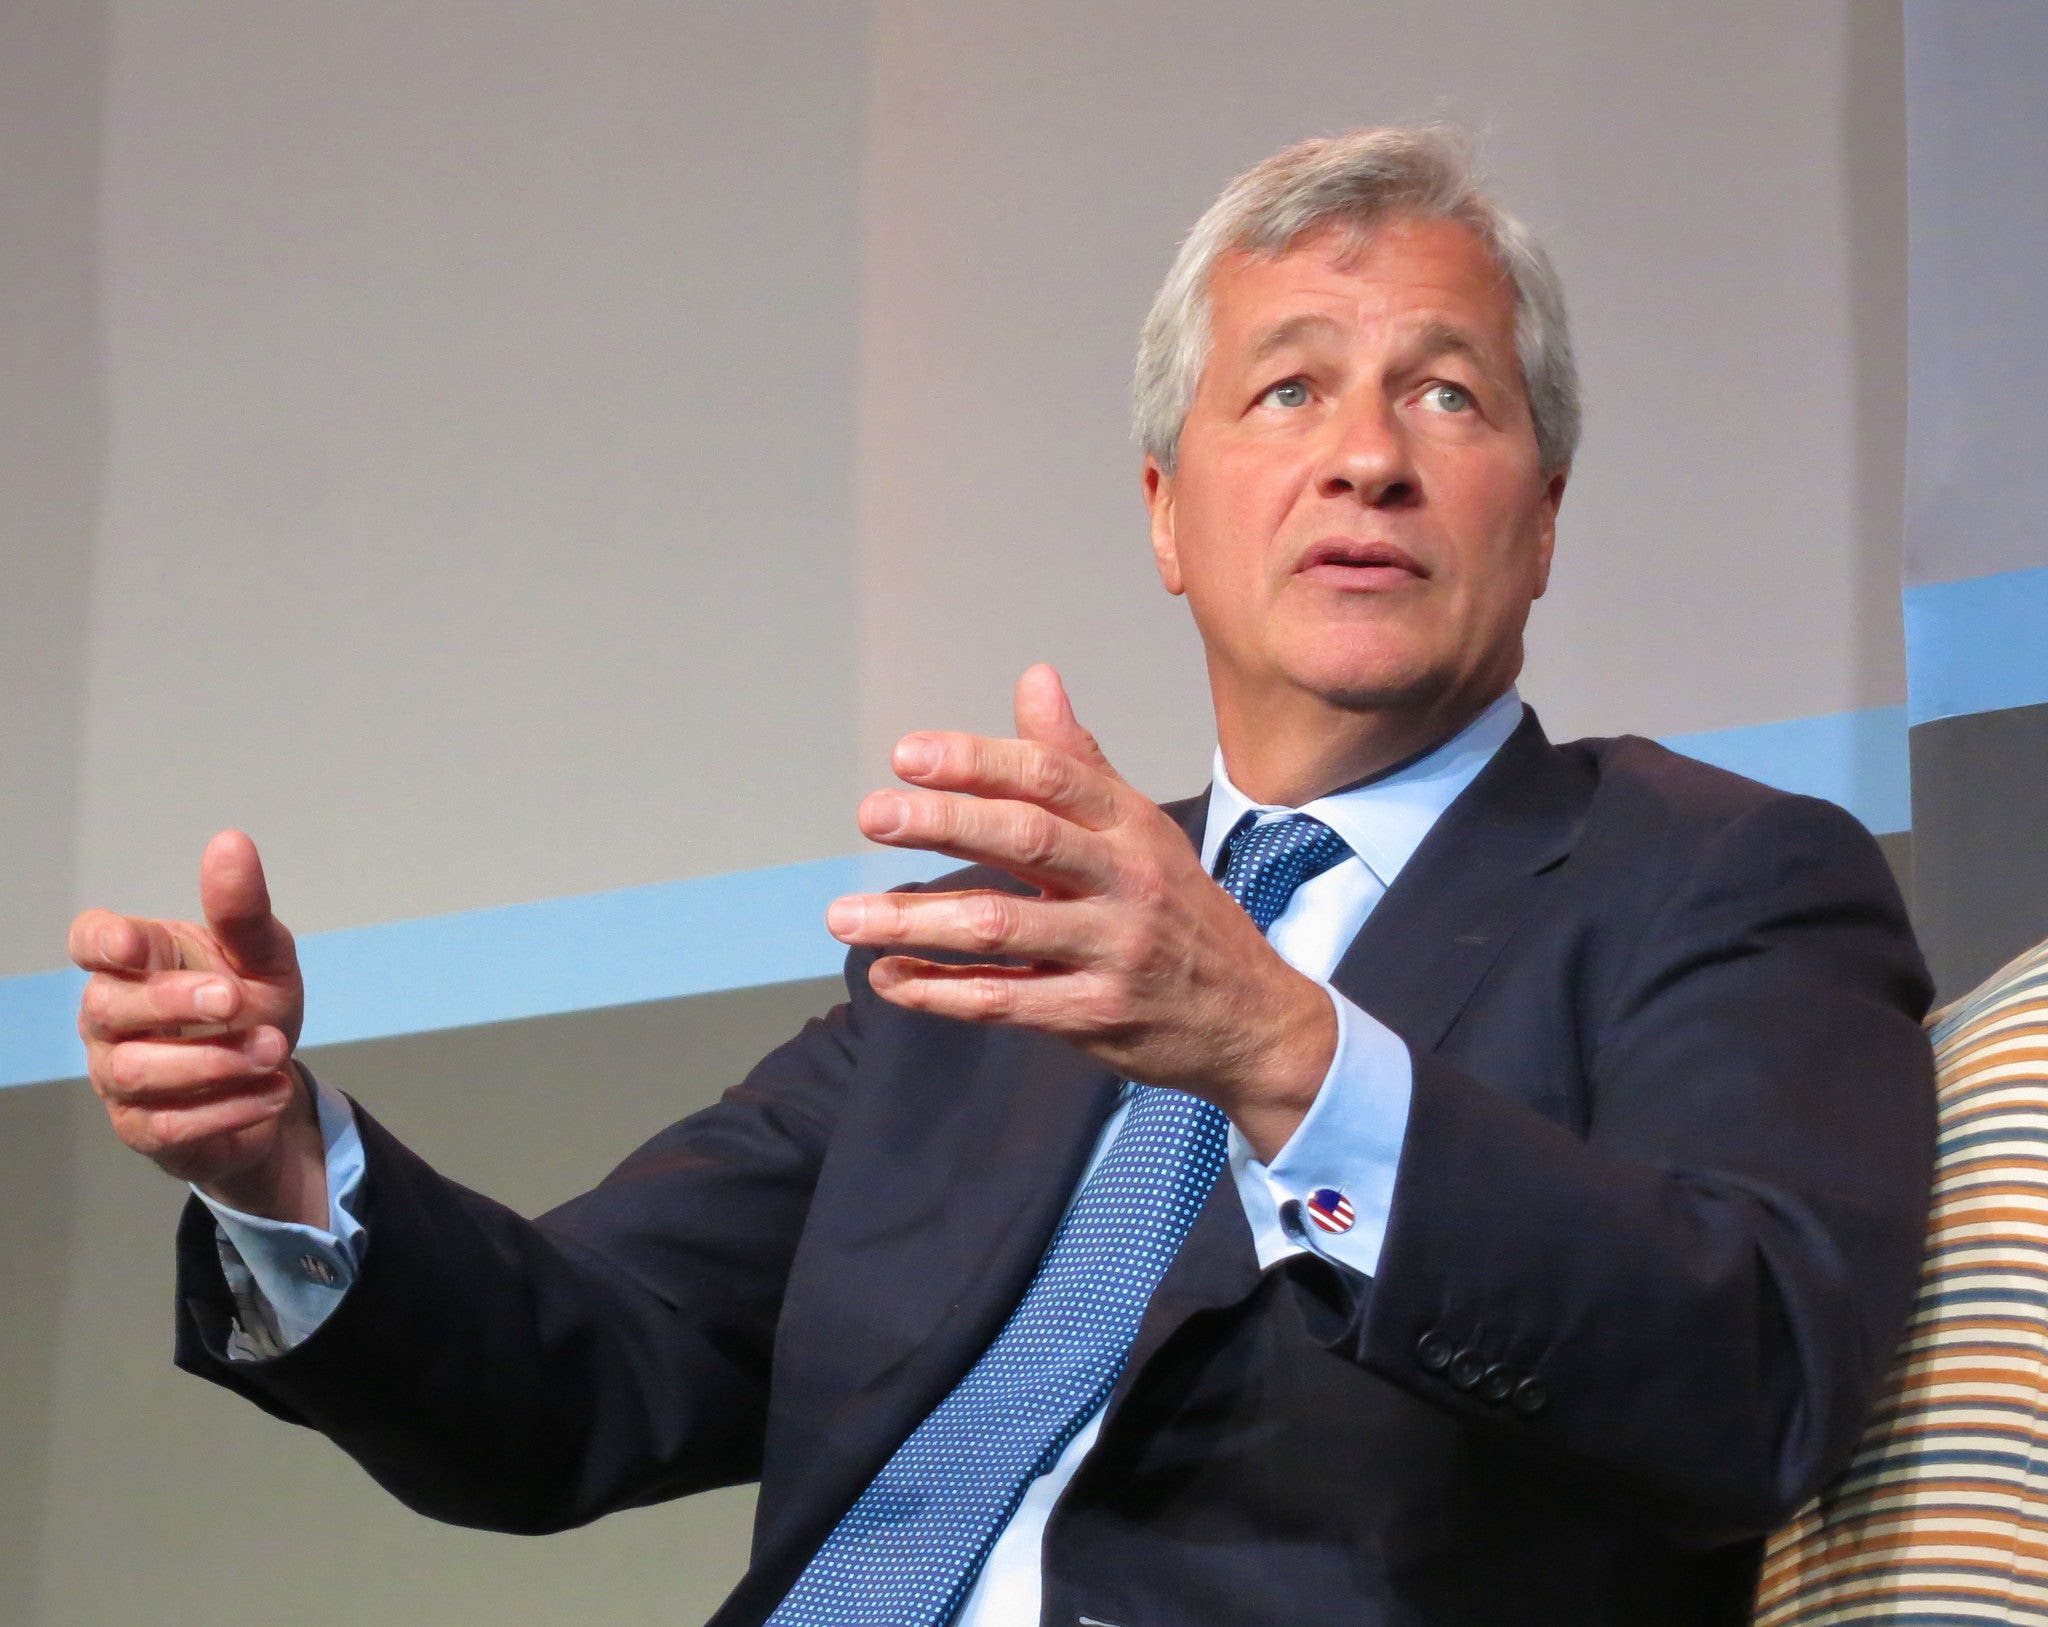 Jamie Dimon Says Inflation Could 'Derail The Economy' And Cause A Recession In 2023 As Rising Prices Cannibalize Consumer Savings